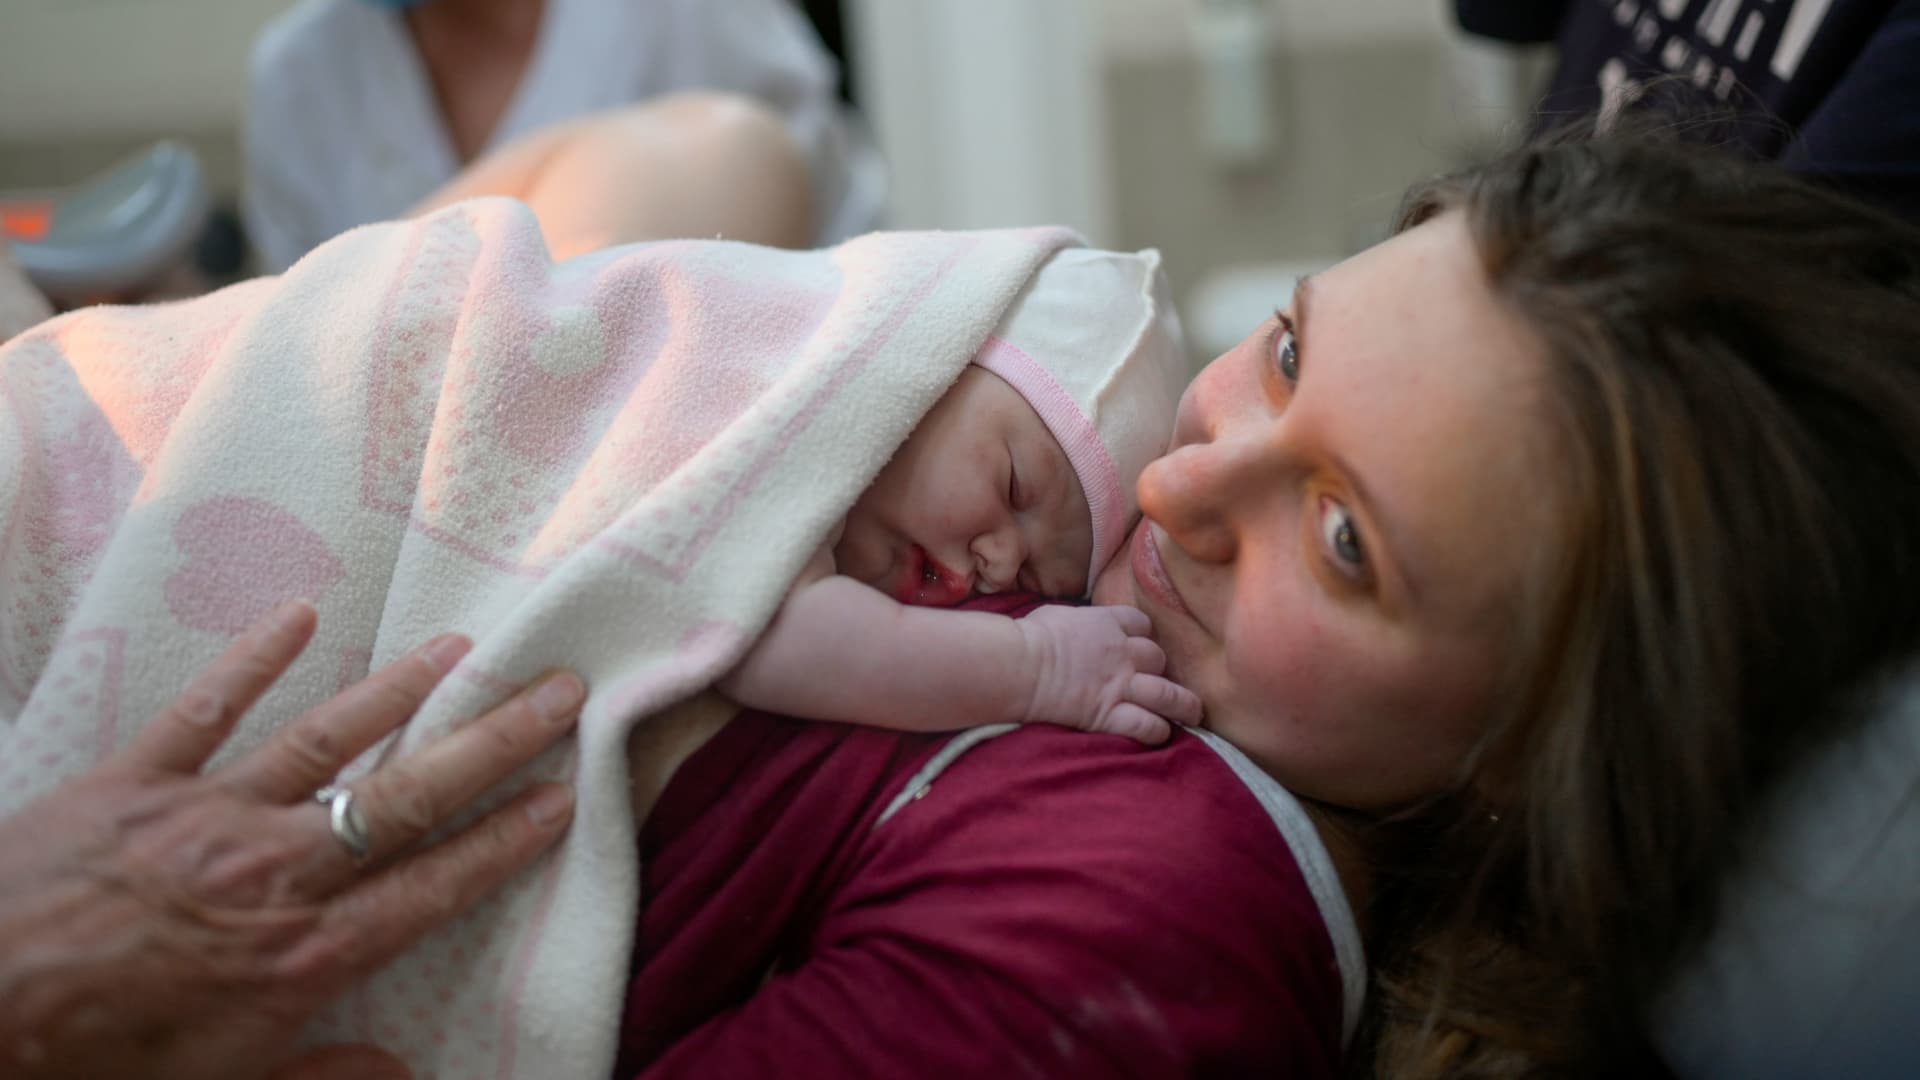 Aleina hugs her baby Snizhana after giving birth in the maternity ward as sirens warn of air raids in Mykolaiv, 14 March 2022.